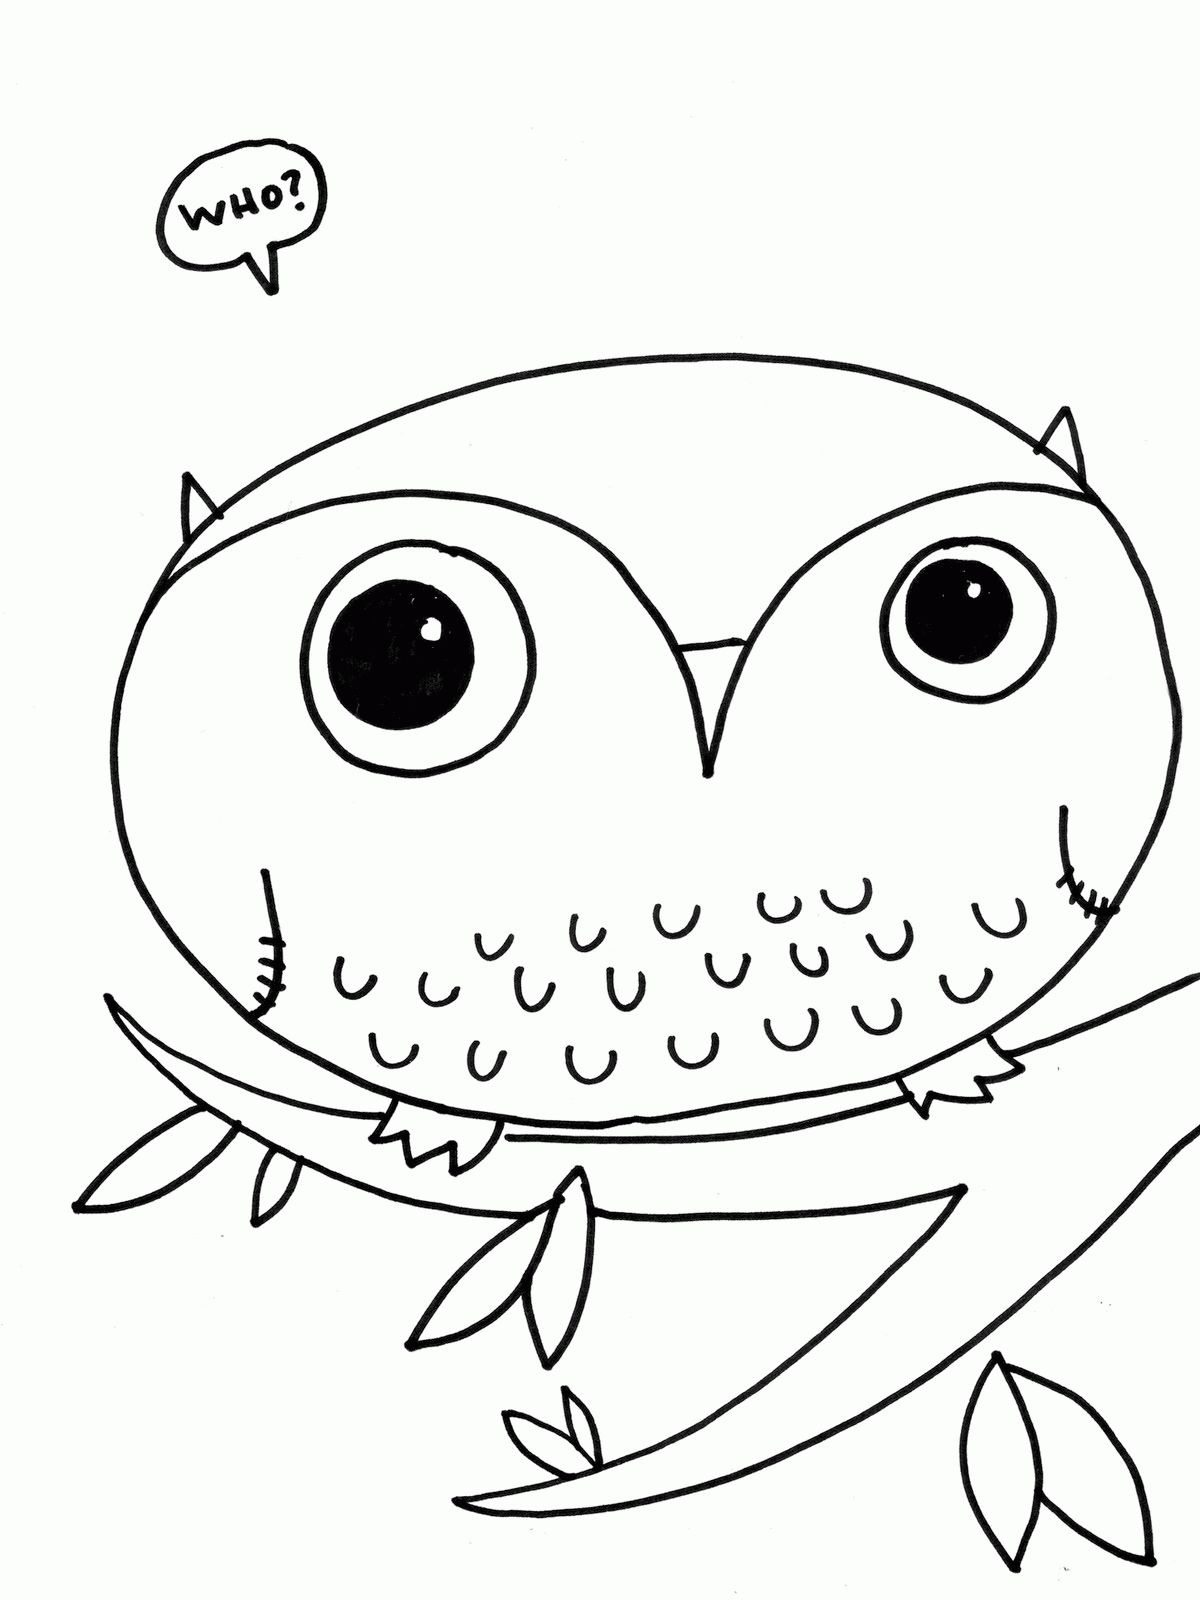 Printable Owl Coloring Page for Pinterest